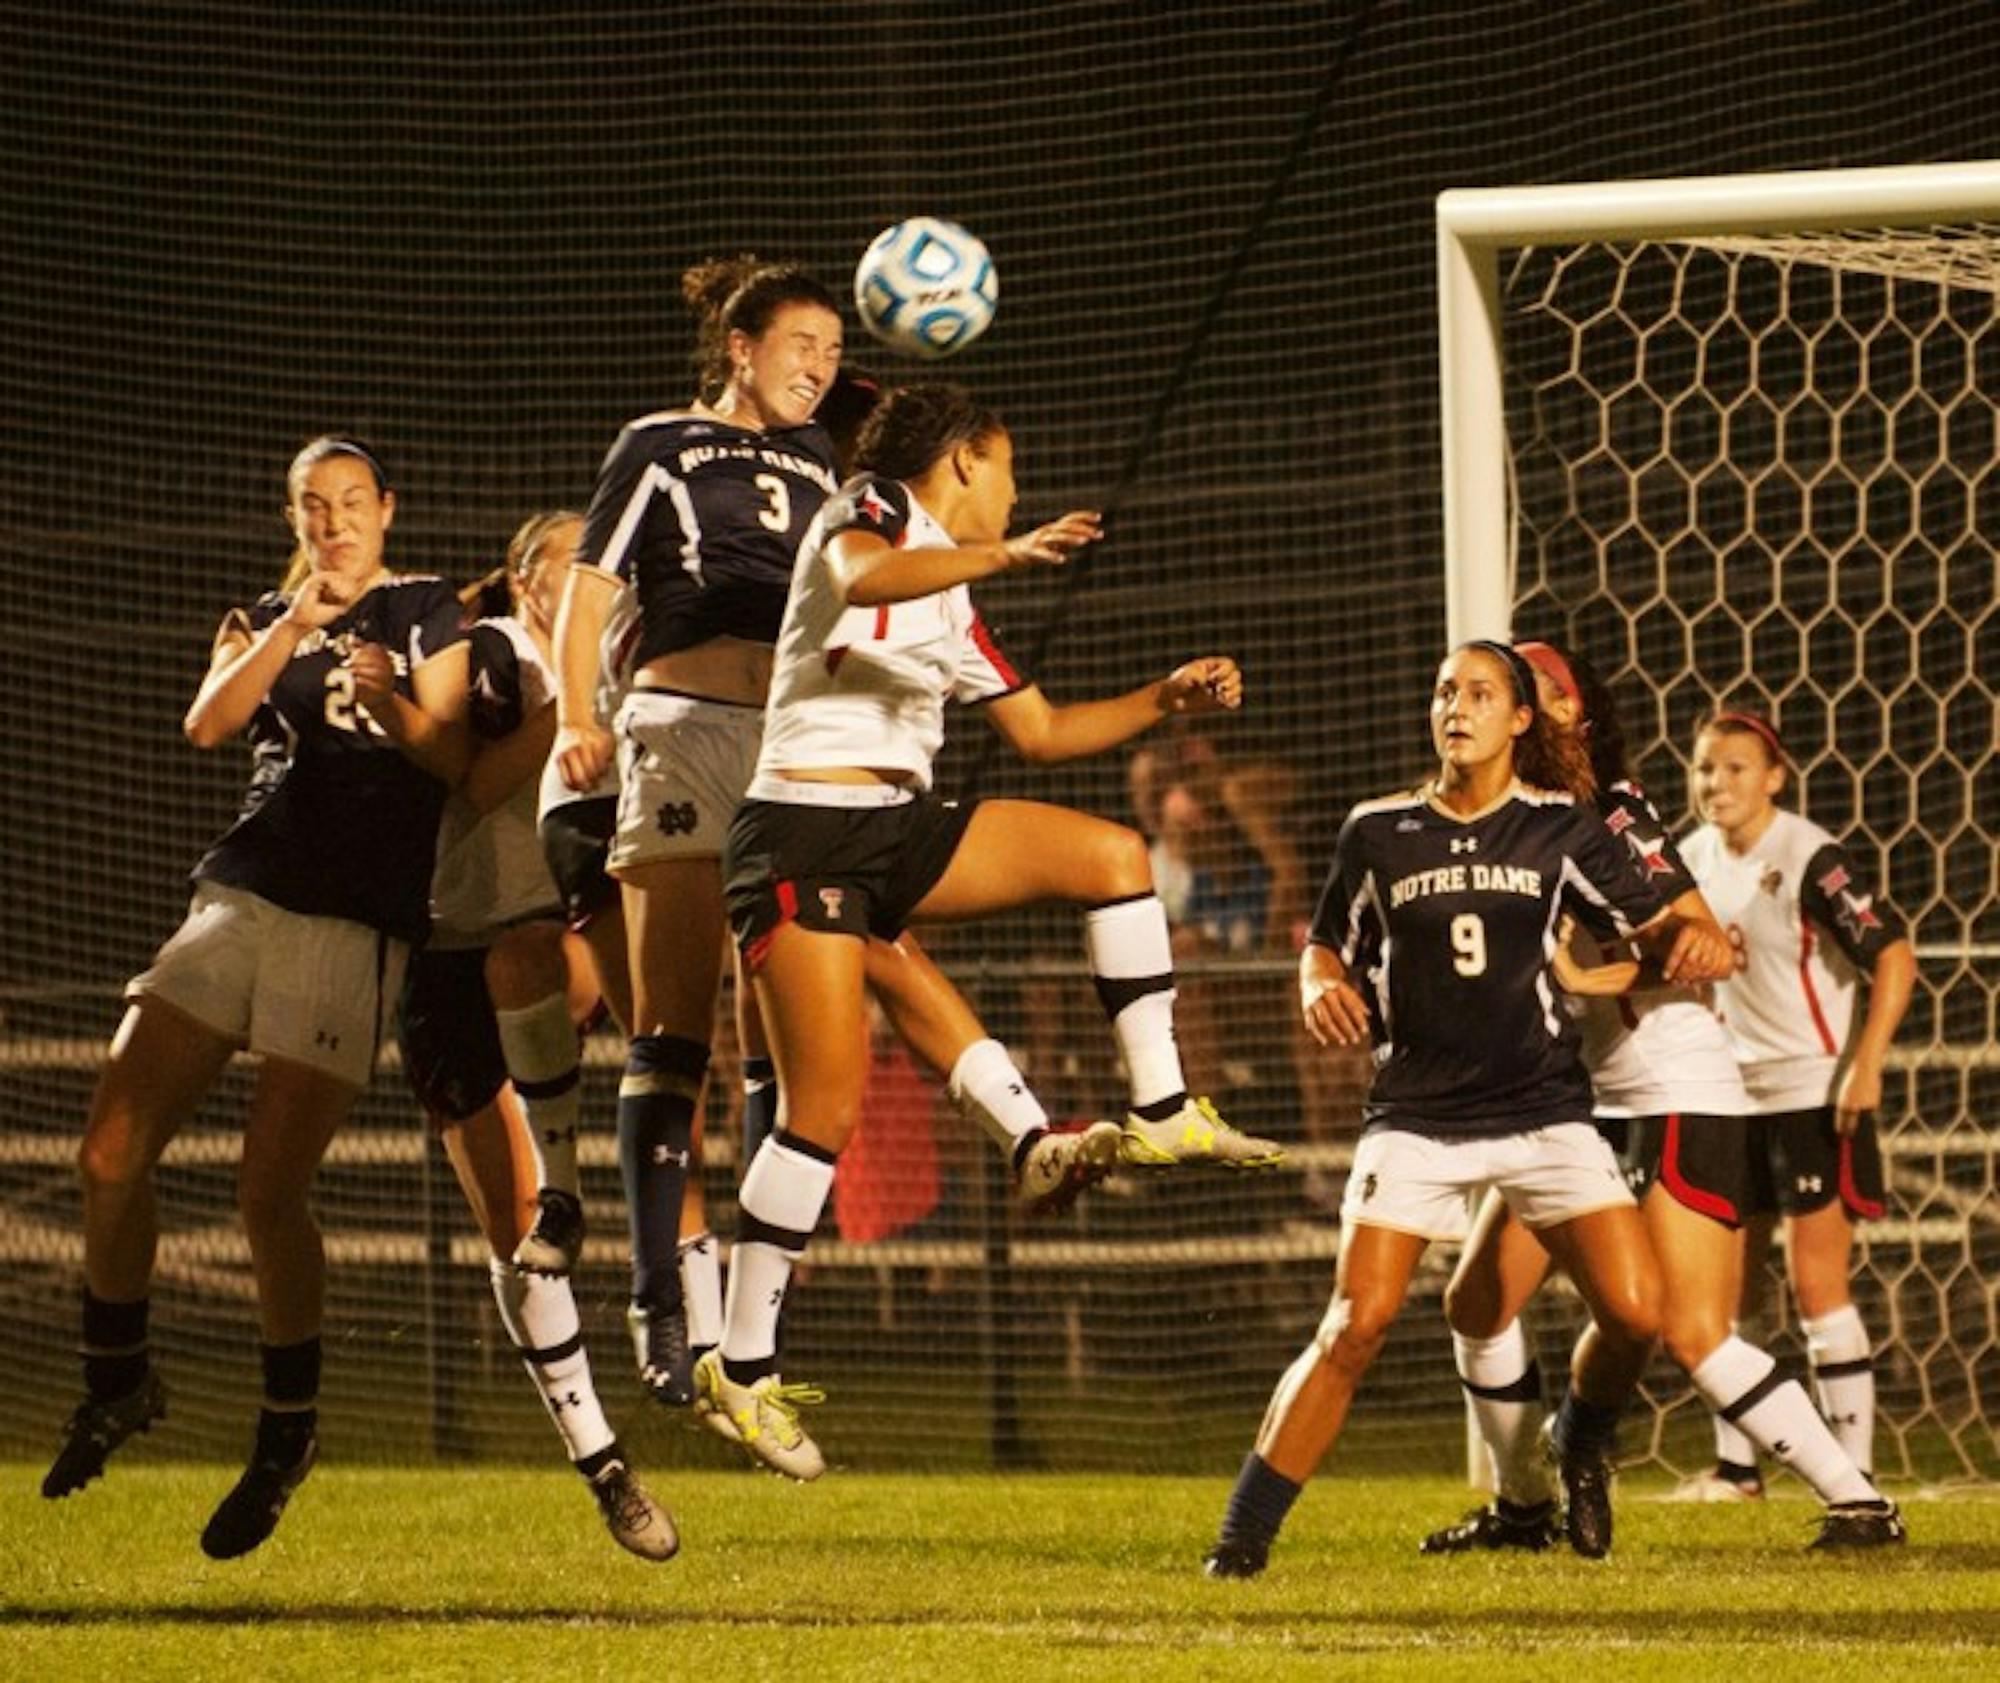 Irish sophomore midfielder Morgan Andrews goes up for a contested header in Notre Dame’s 2-1 loss to Texas Tech on Aug. 29.